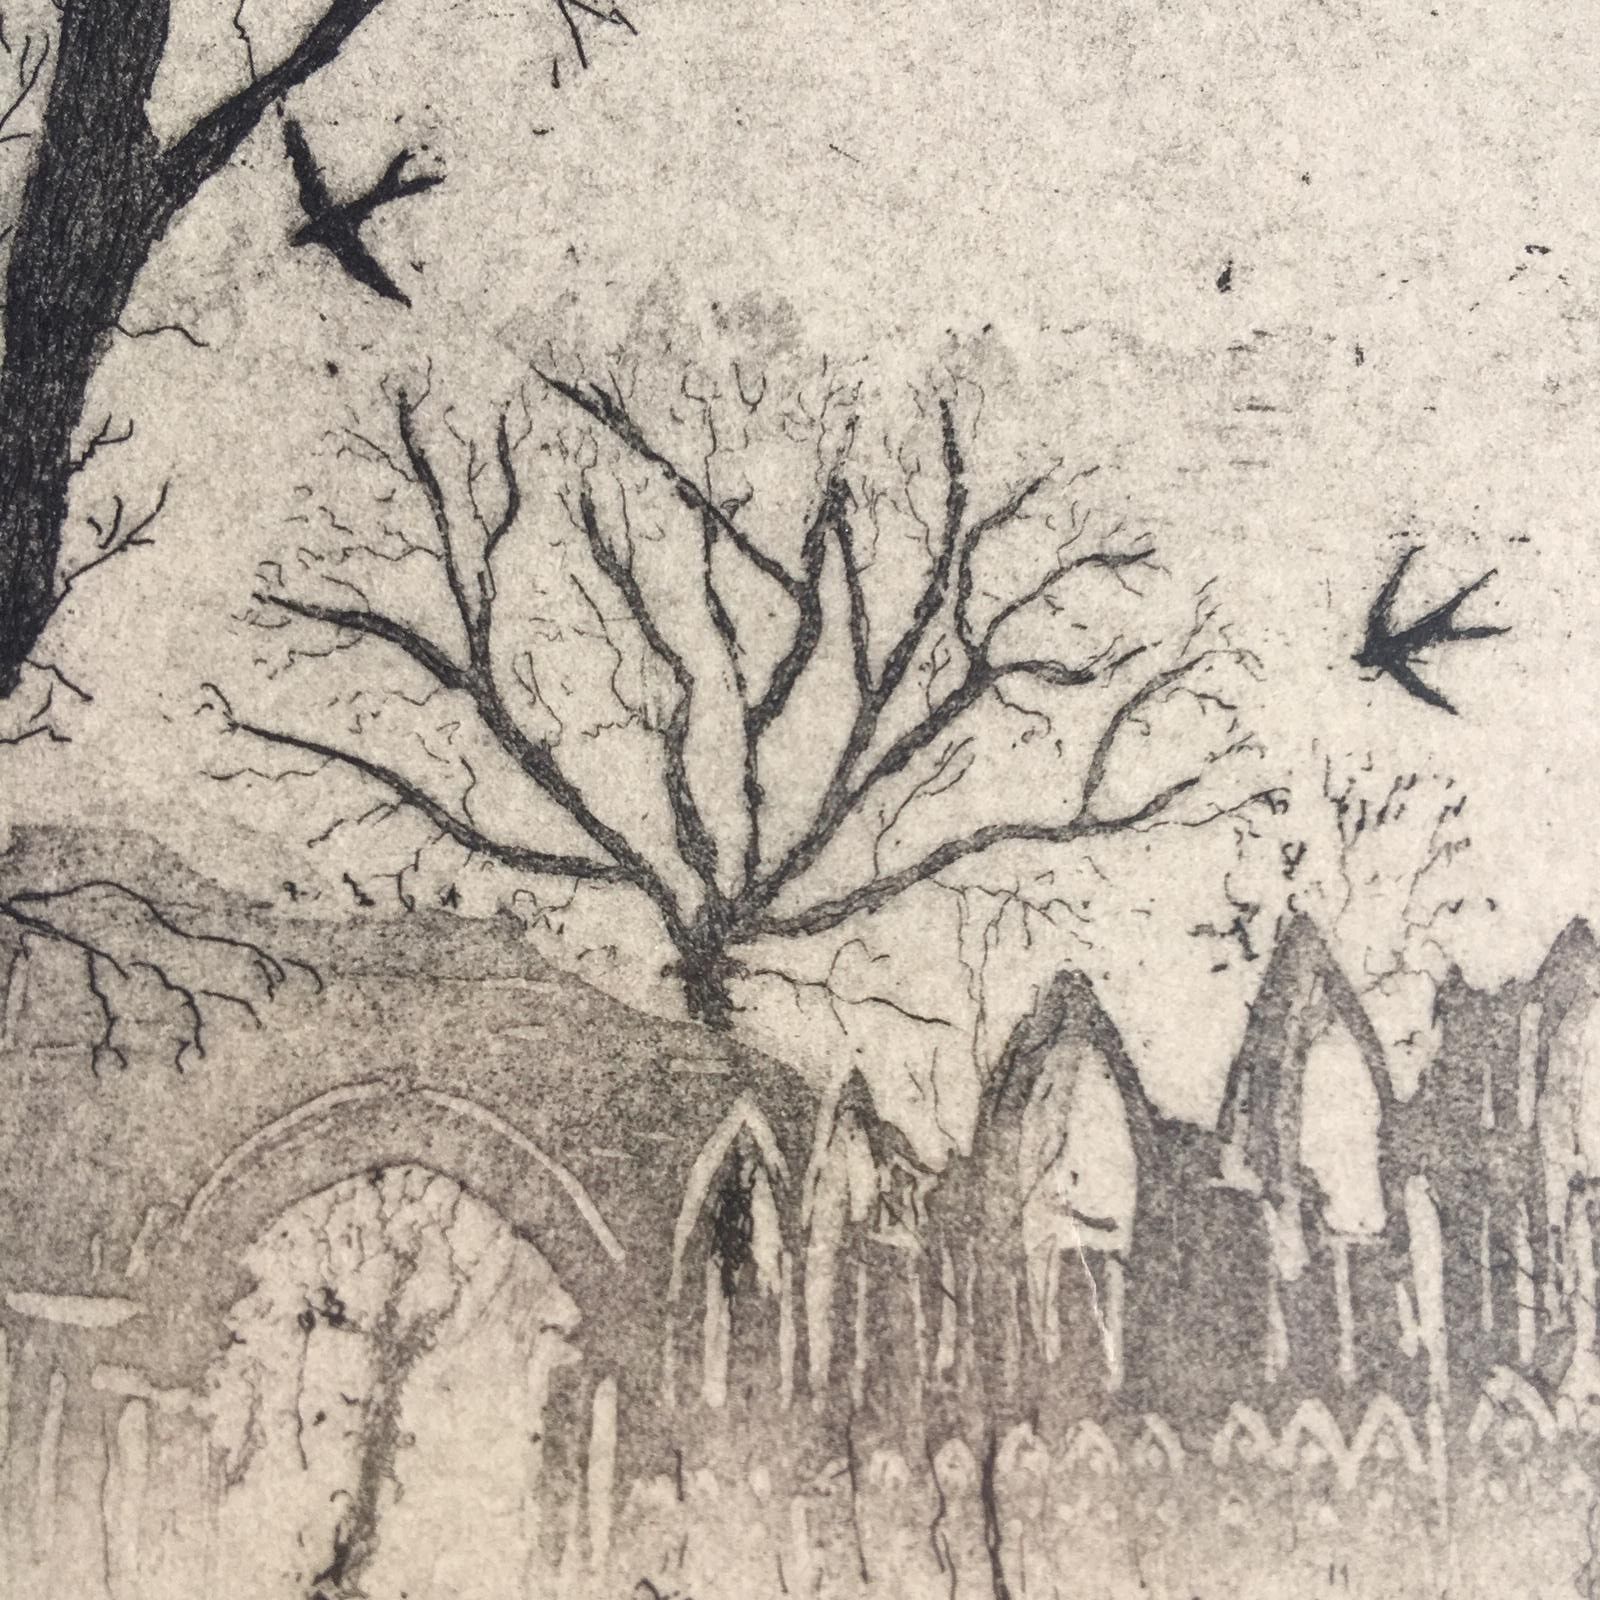 Swallows Over the Abbey by Tim Southall - Secondary Image